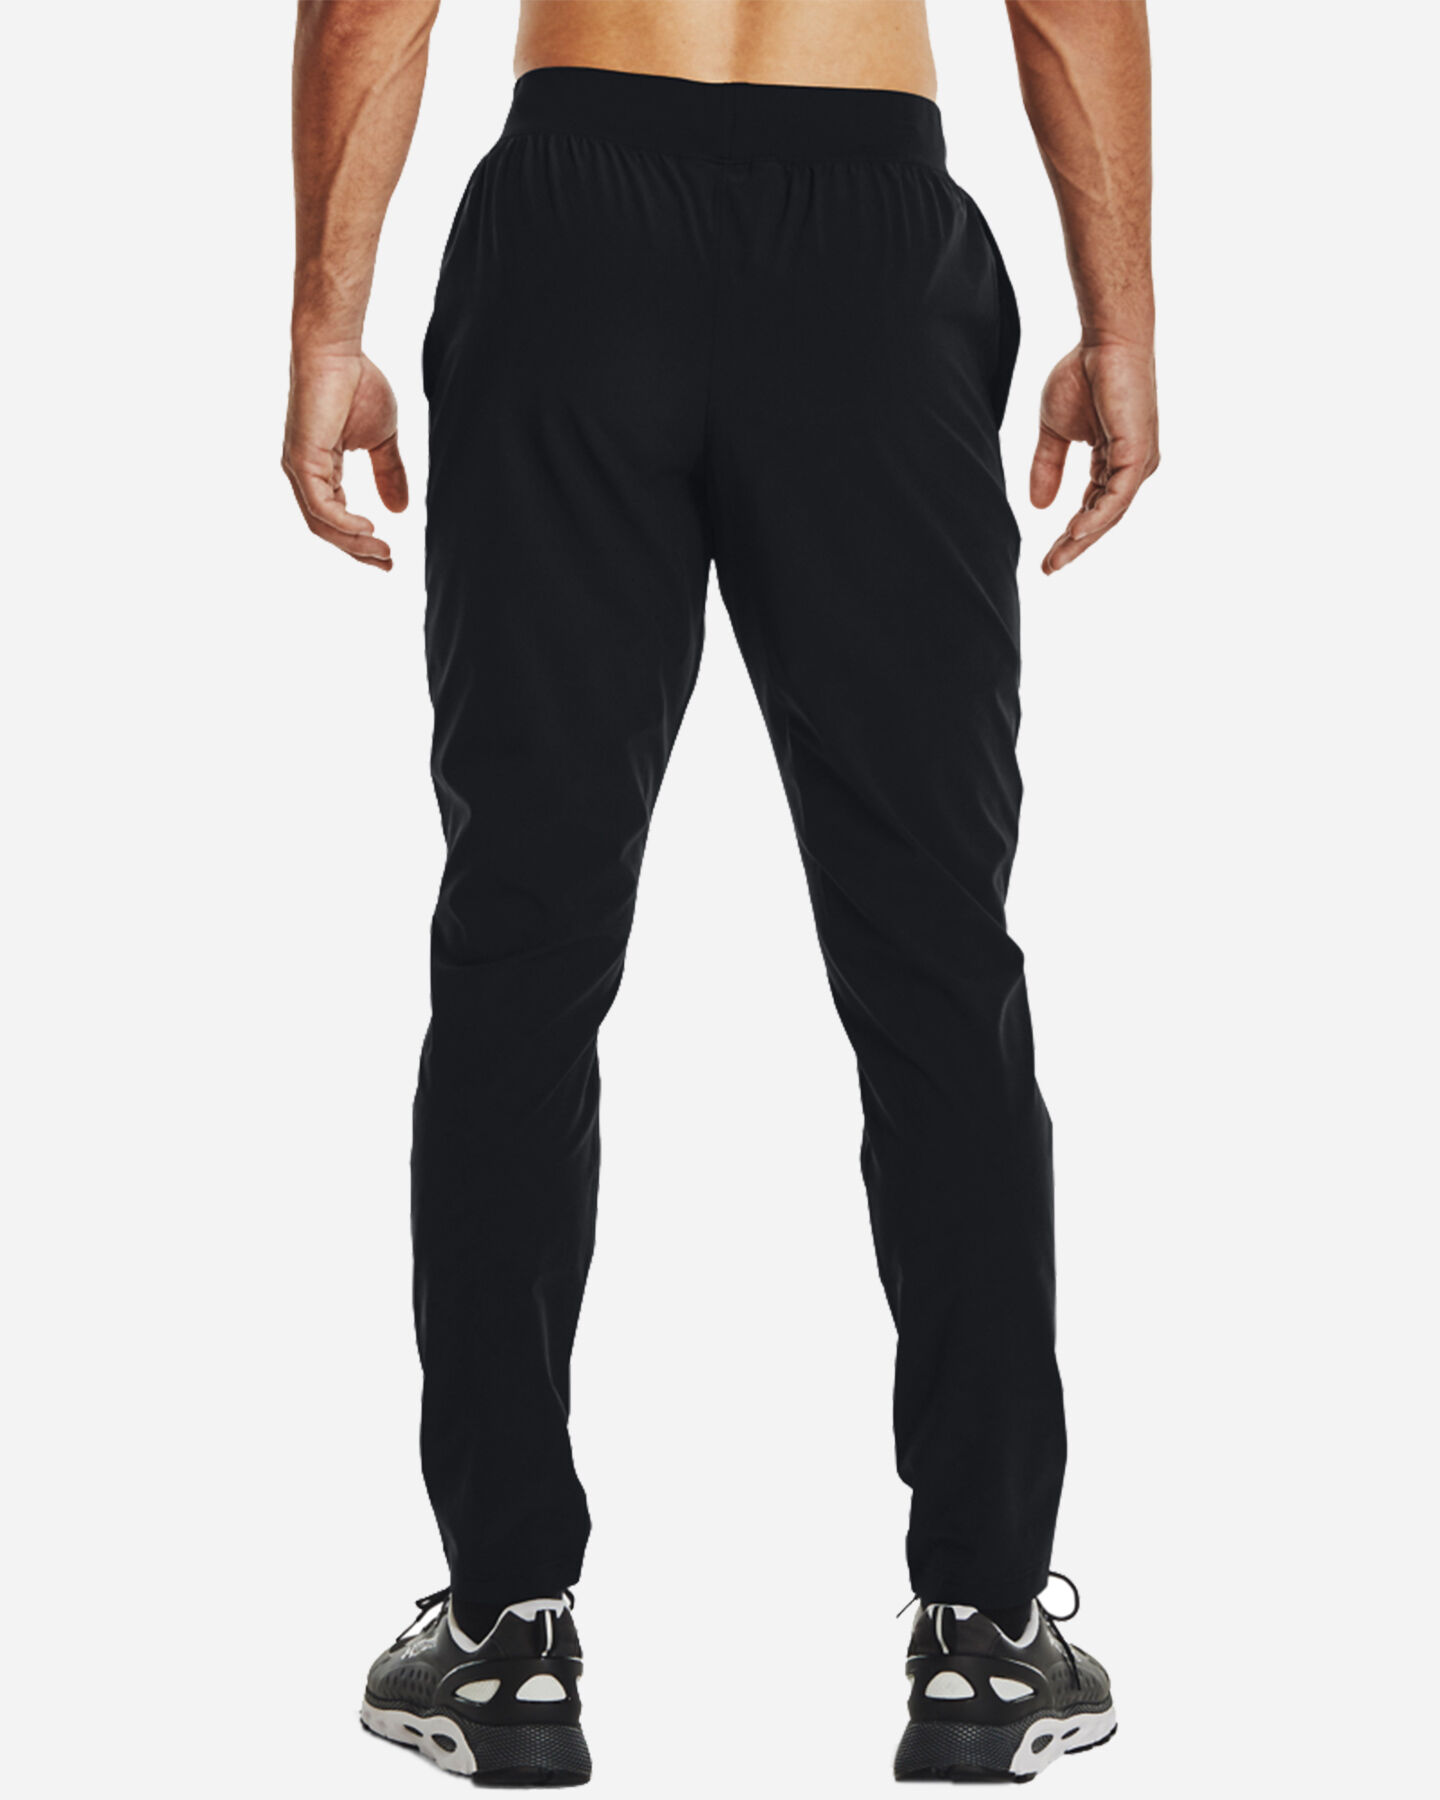  Pantalone training UNDER ARMOUR STRETCH WOVEN M S5336577 scatto 3